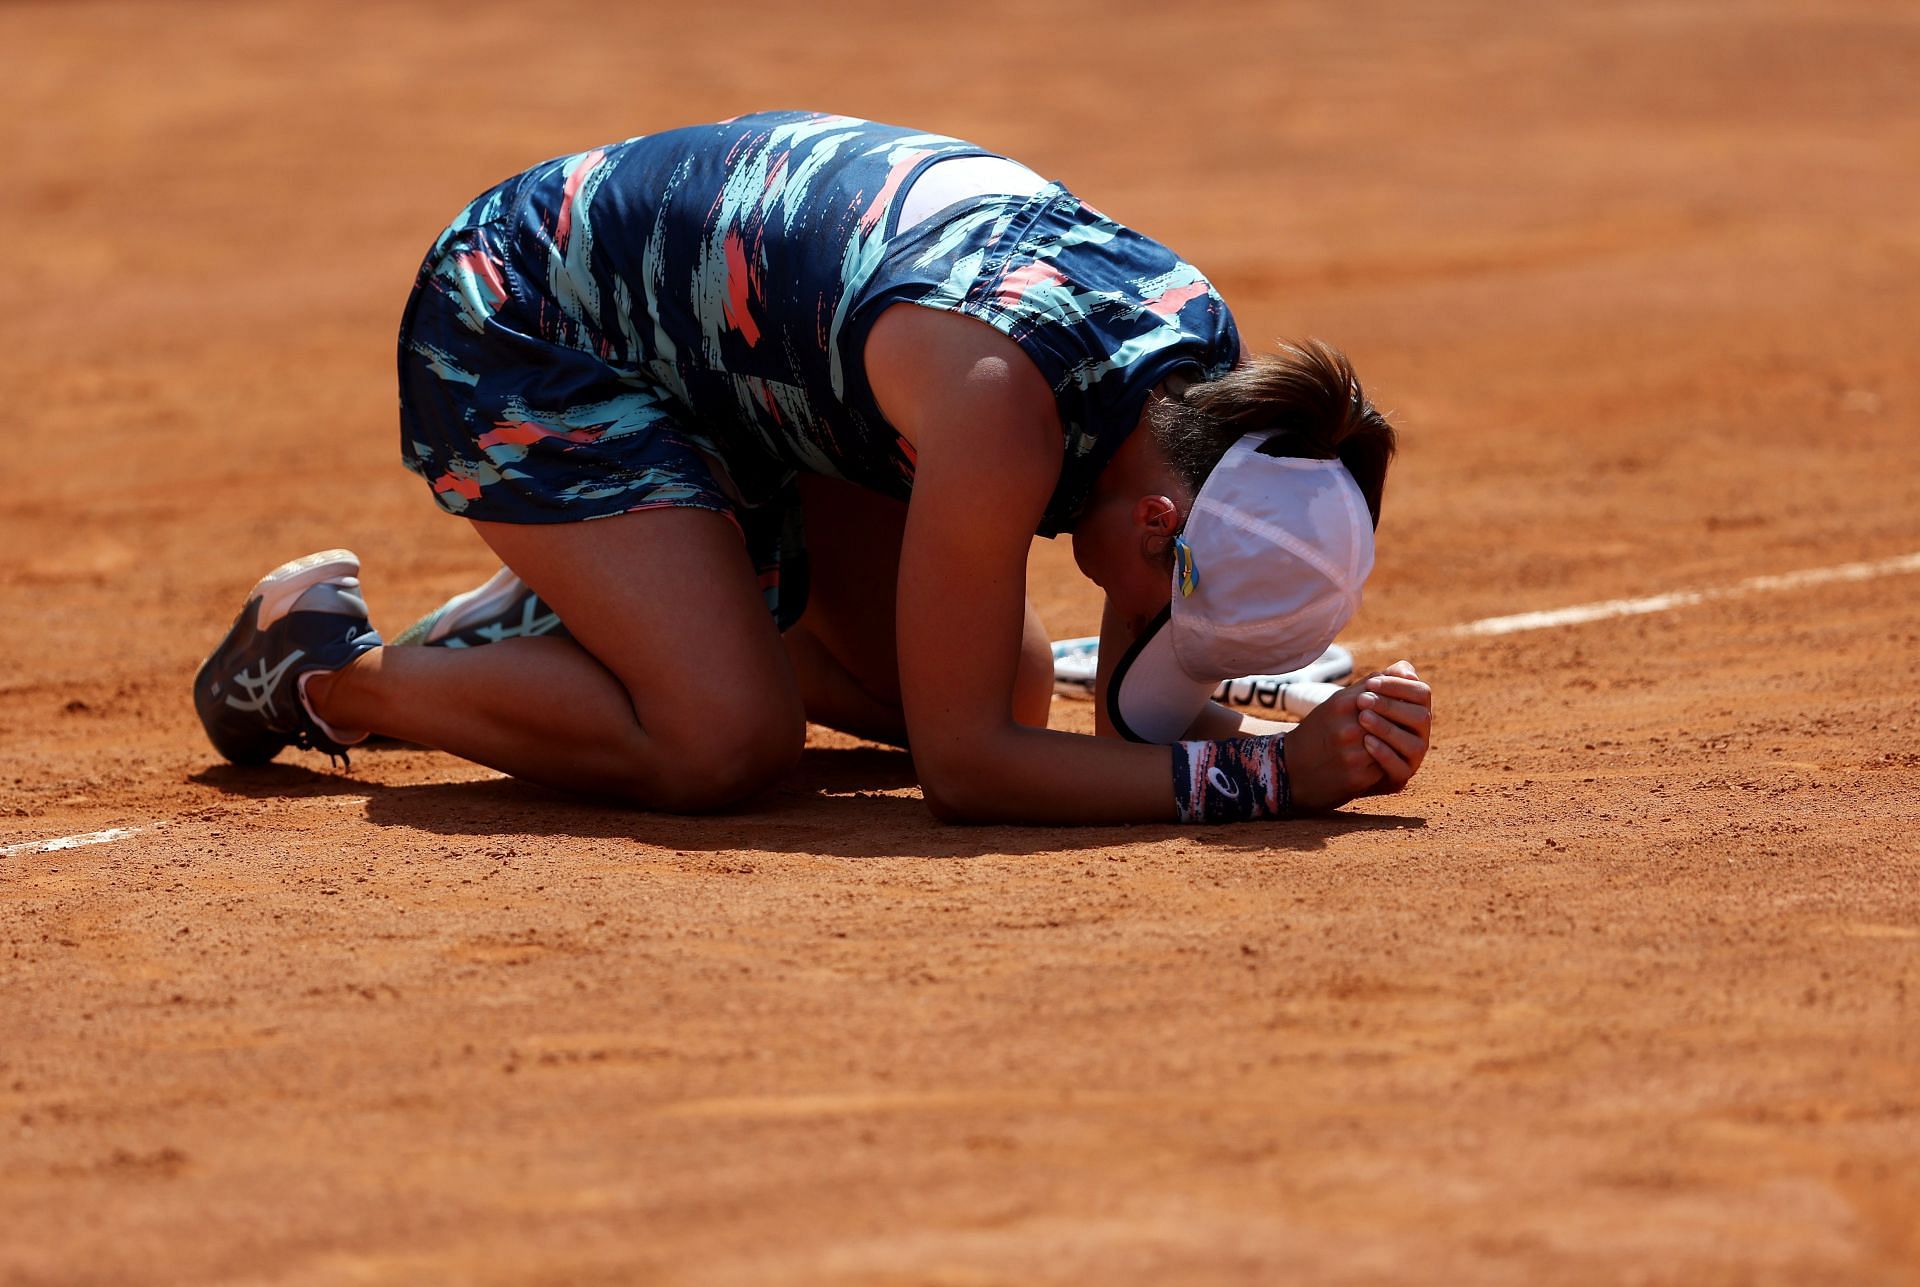 World No. 1 Iga Swiatek drops to her knees after successfully defending her title for the first time in Rome.